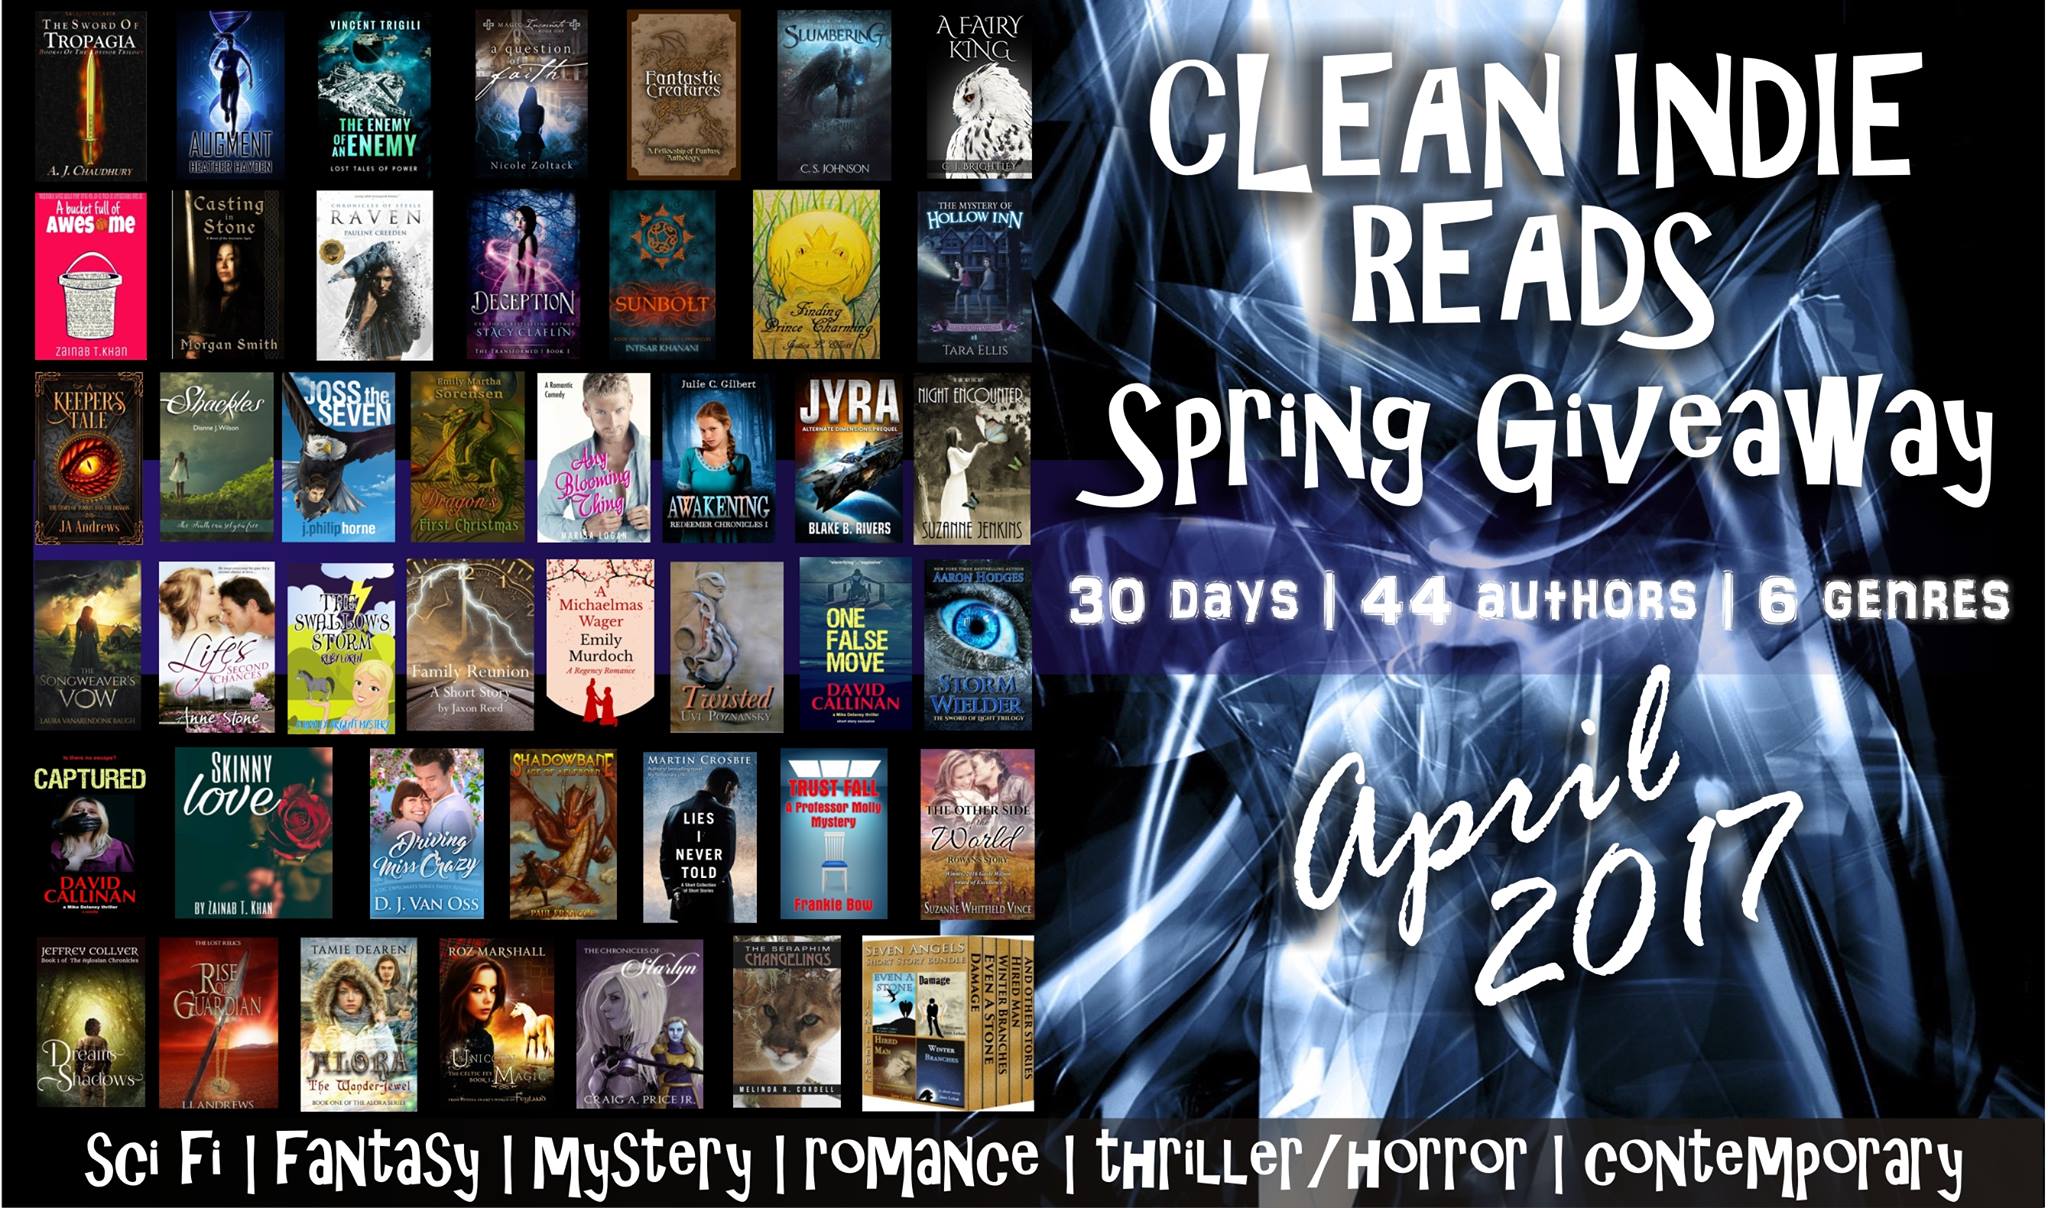 Announcement: Clean Indie Reads Spring Giveaway